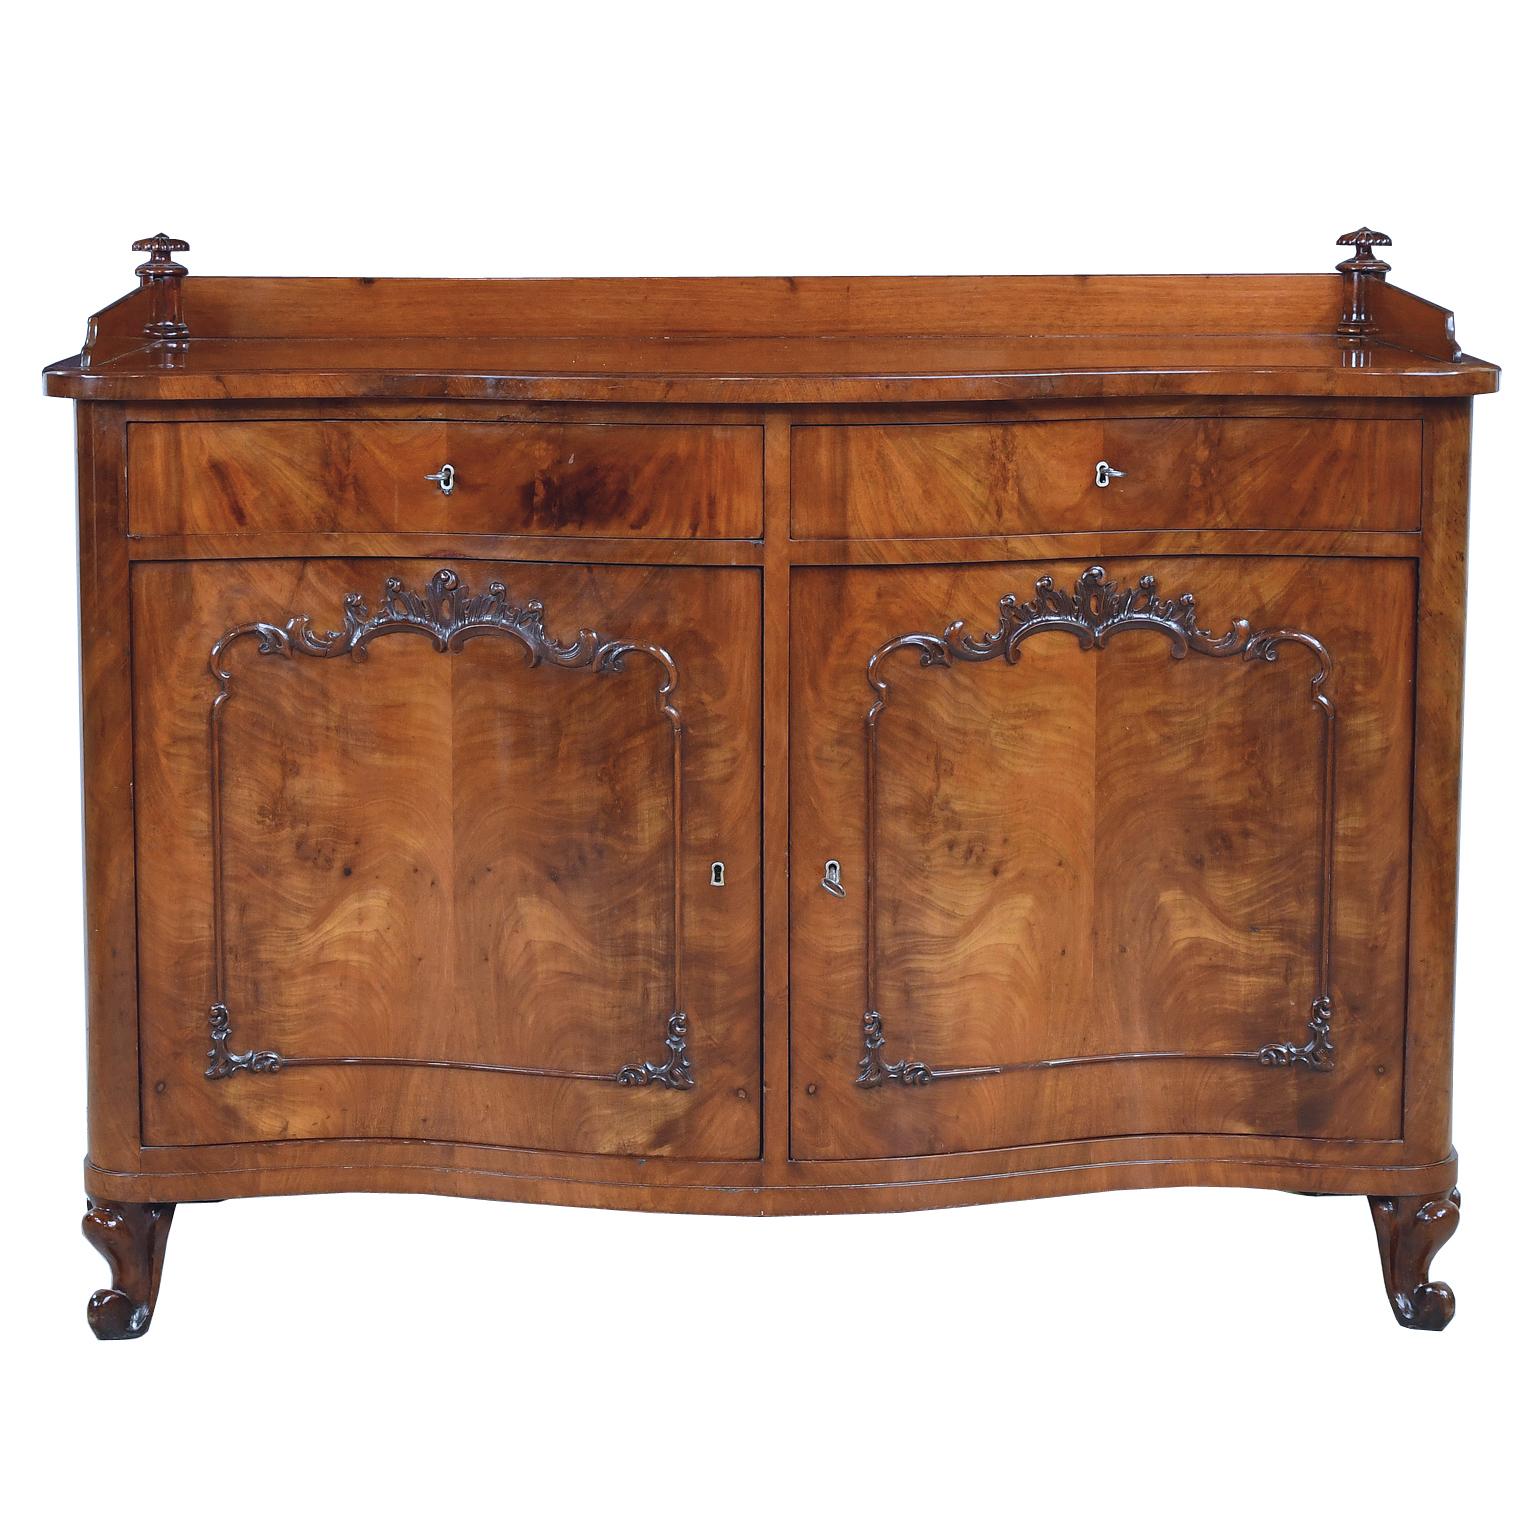 Christian VIII Serpentine-Front Sideboard in West Indies Mahogany, circa 1850 For Sale 2